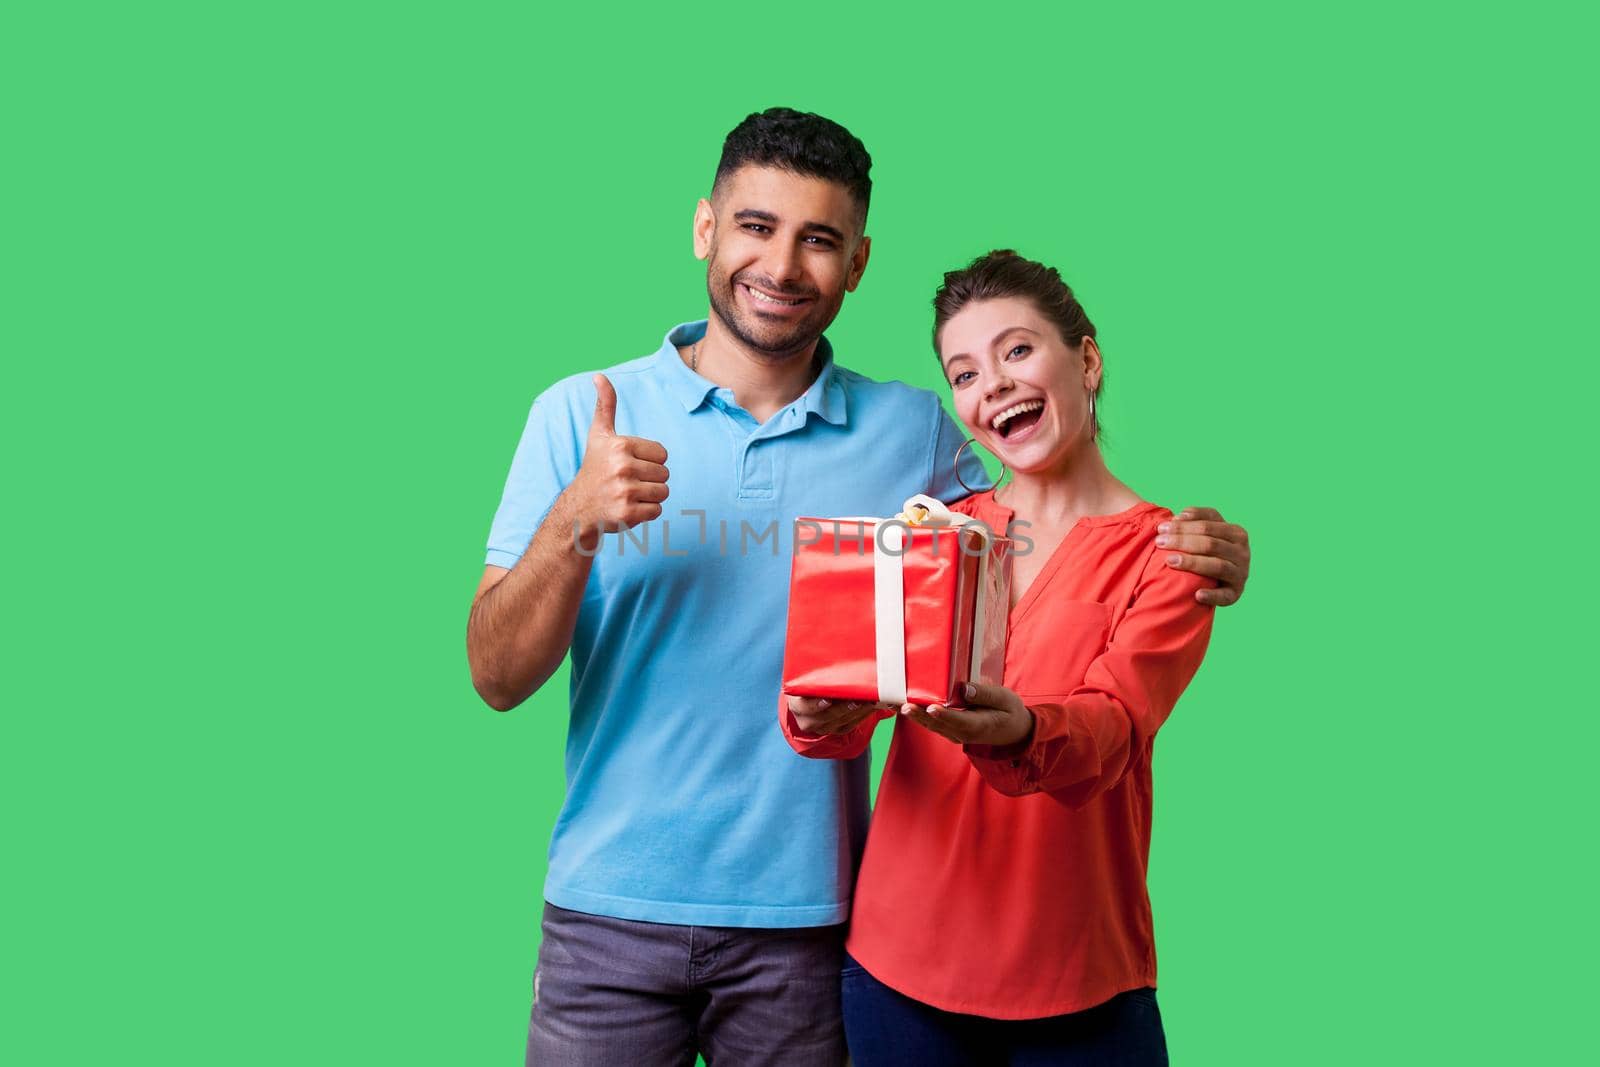 Like this present. Portrait of cheerful young couple in casual wear standing together, woman showing gift box to camera, man gesturing thumbs up. isolated on green background, indoor studio shot